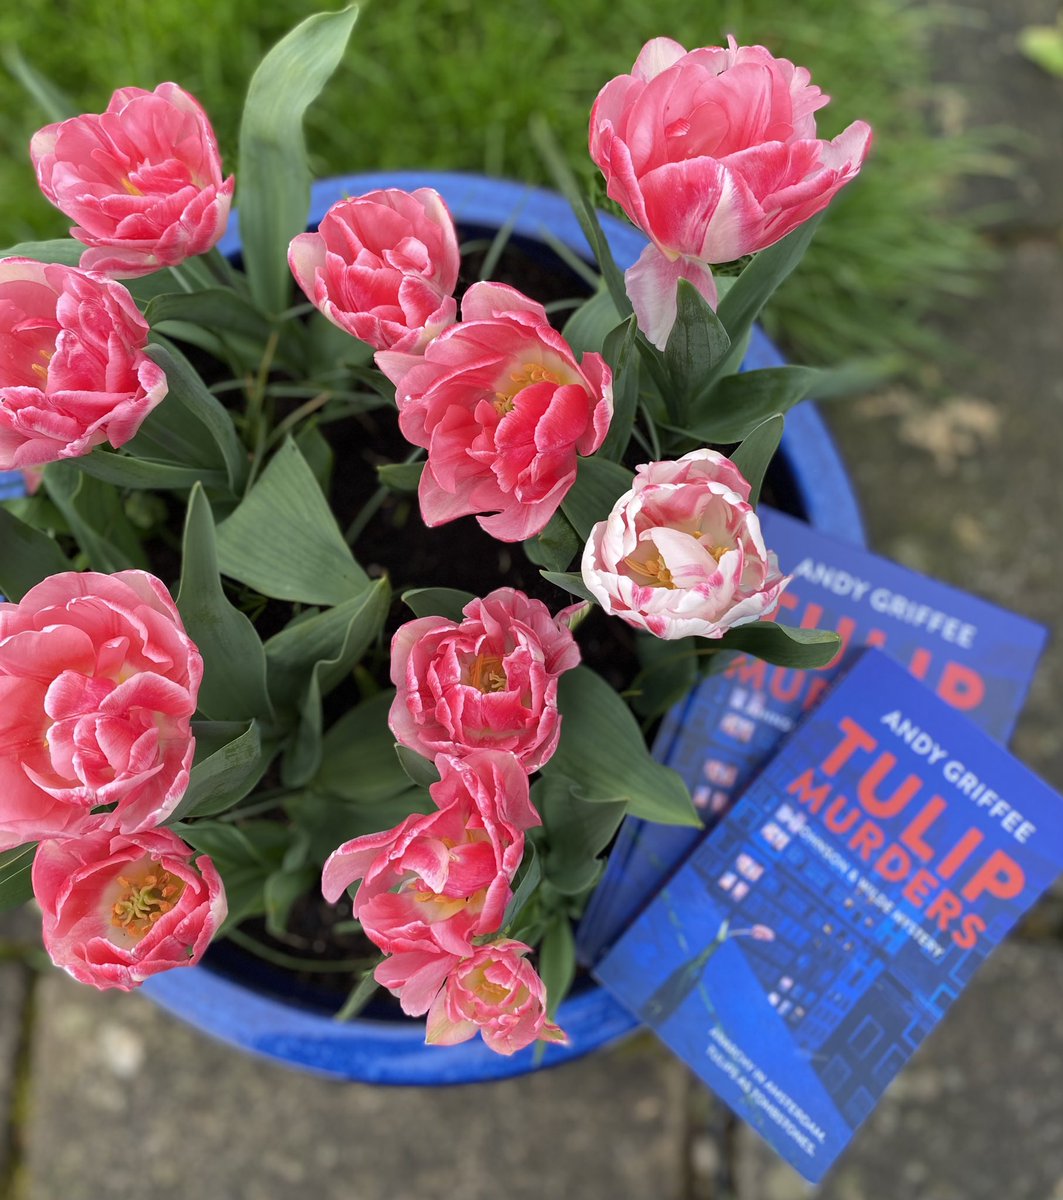 #TulipMurders is blooming! Thank you to everyone who has found my latest #JohnsonandWilde crime mystery on Amazon. Book 5 in the series. It survived Storm Kathleen and seems to be blossoming. @CRTBoating @IWA_UK @The_CWA @BTposse @OrphansPublish @waterwaysworld #CrimeFiction